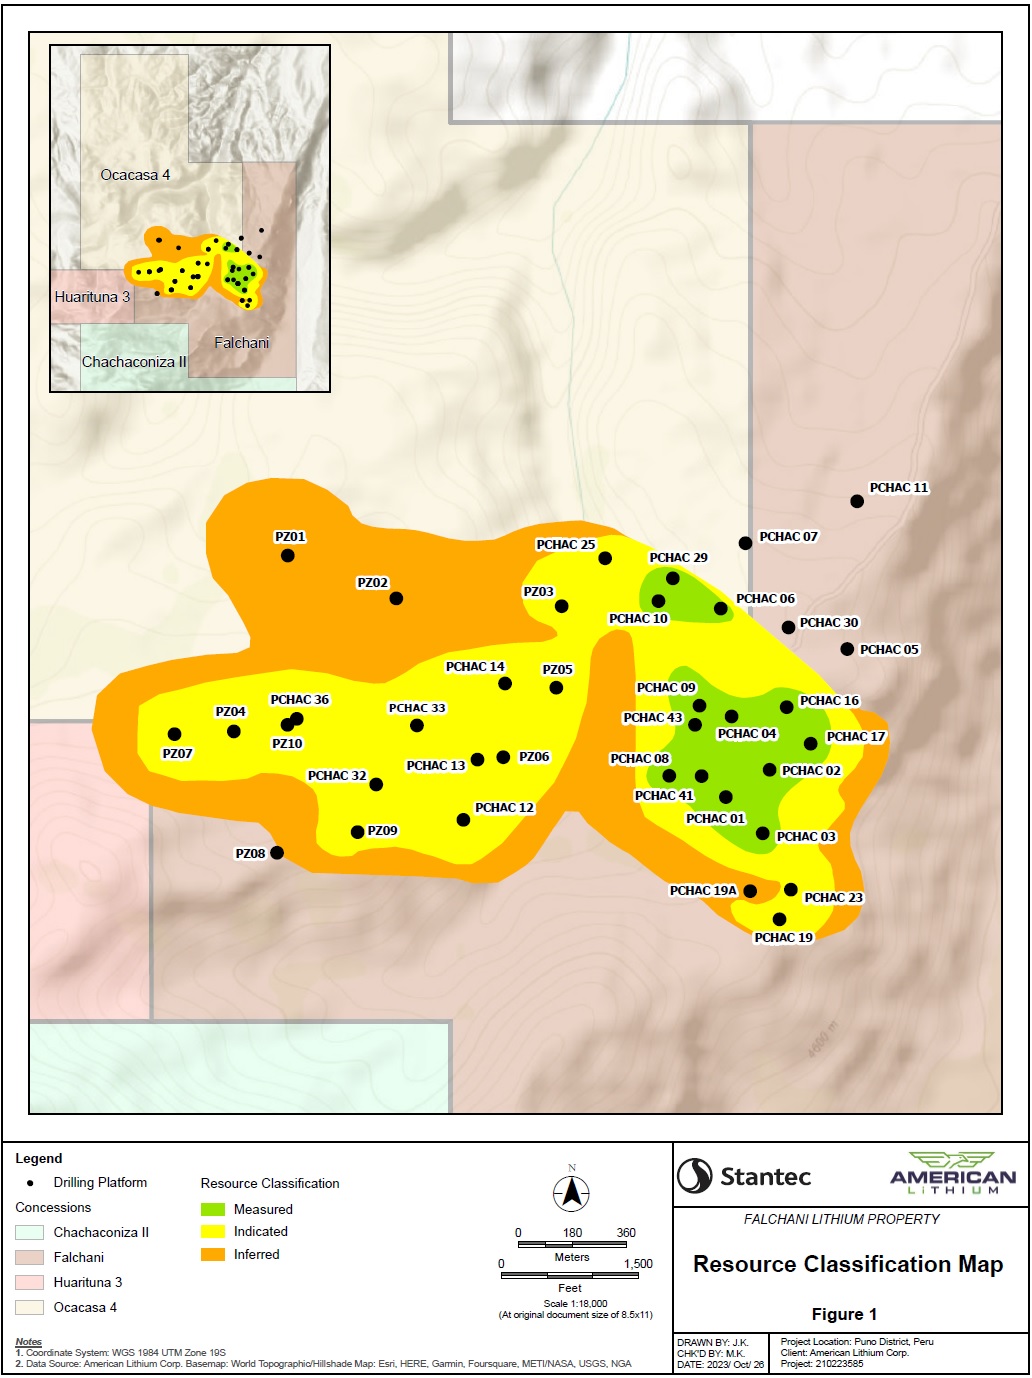 Falchani Project Mineral Classification and Drill Platform Location Map